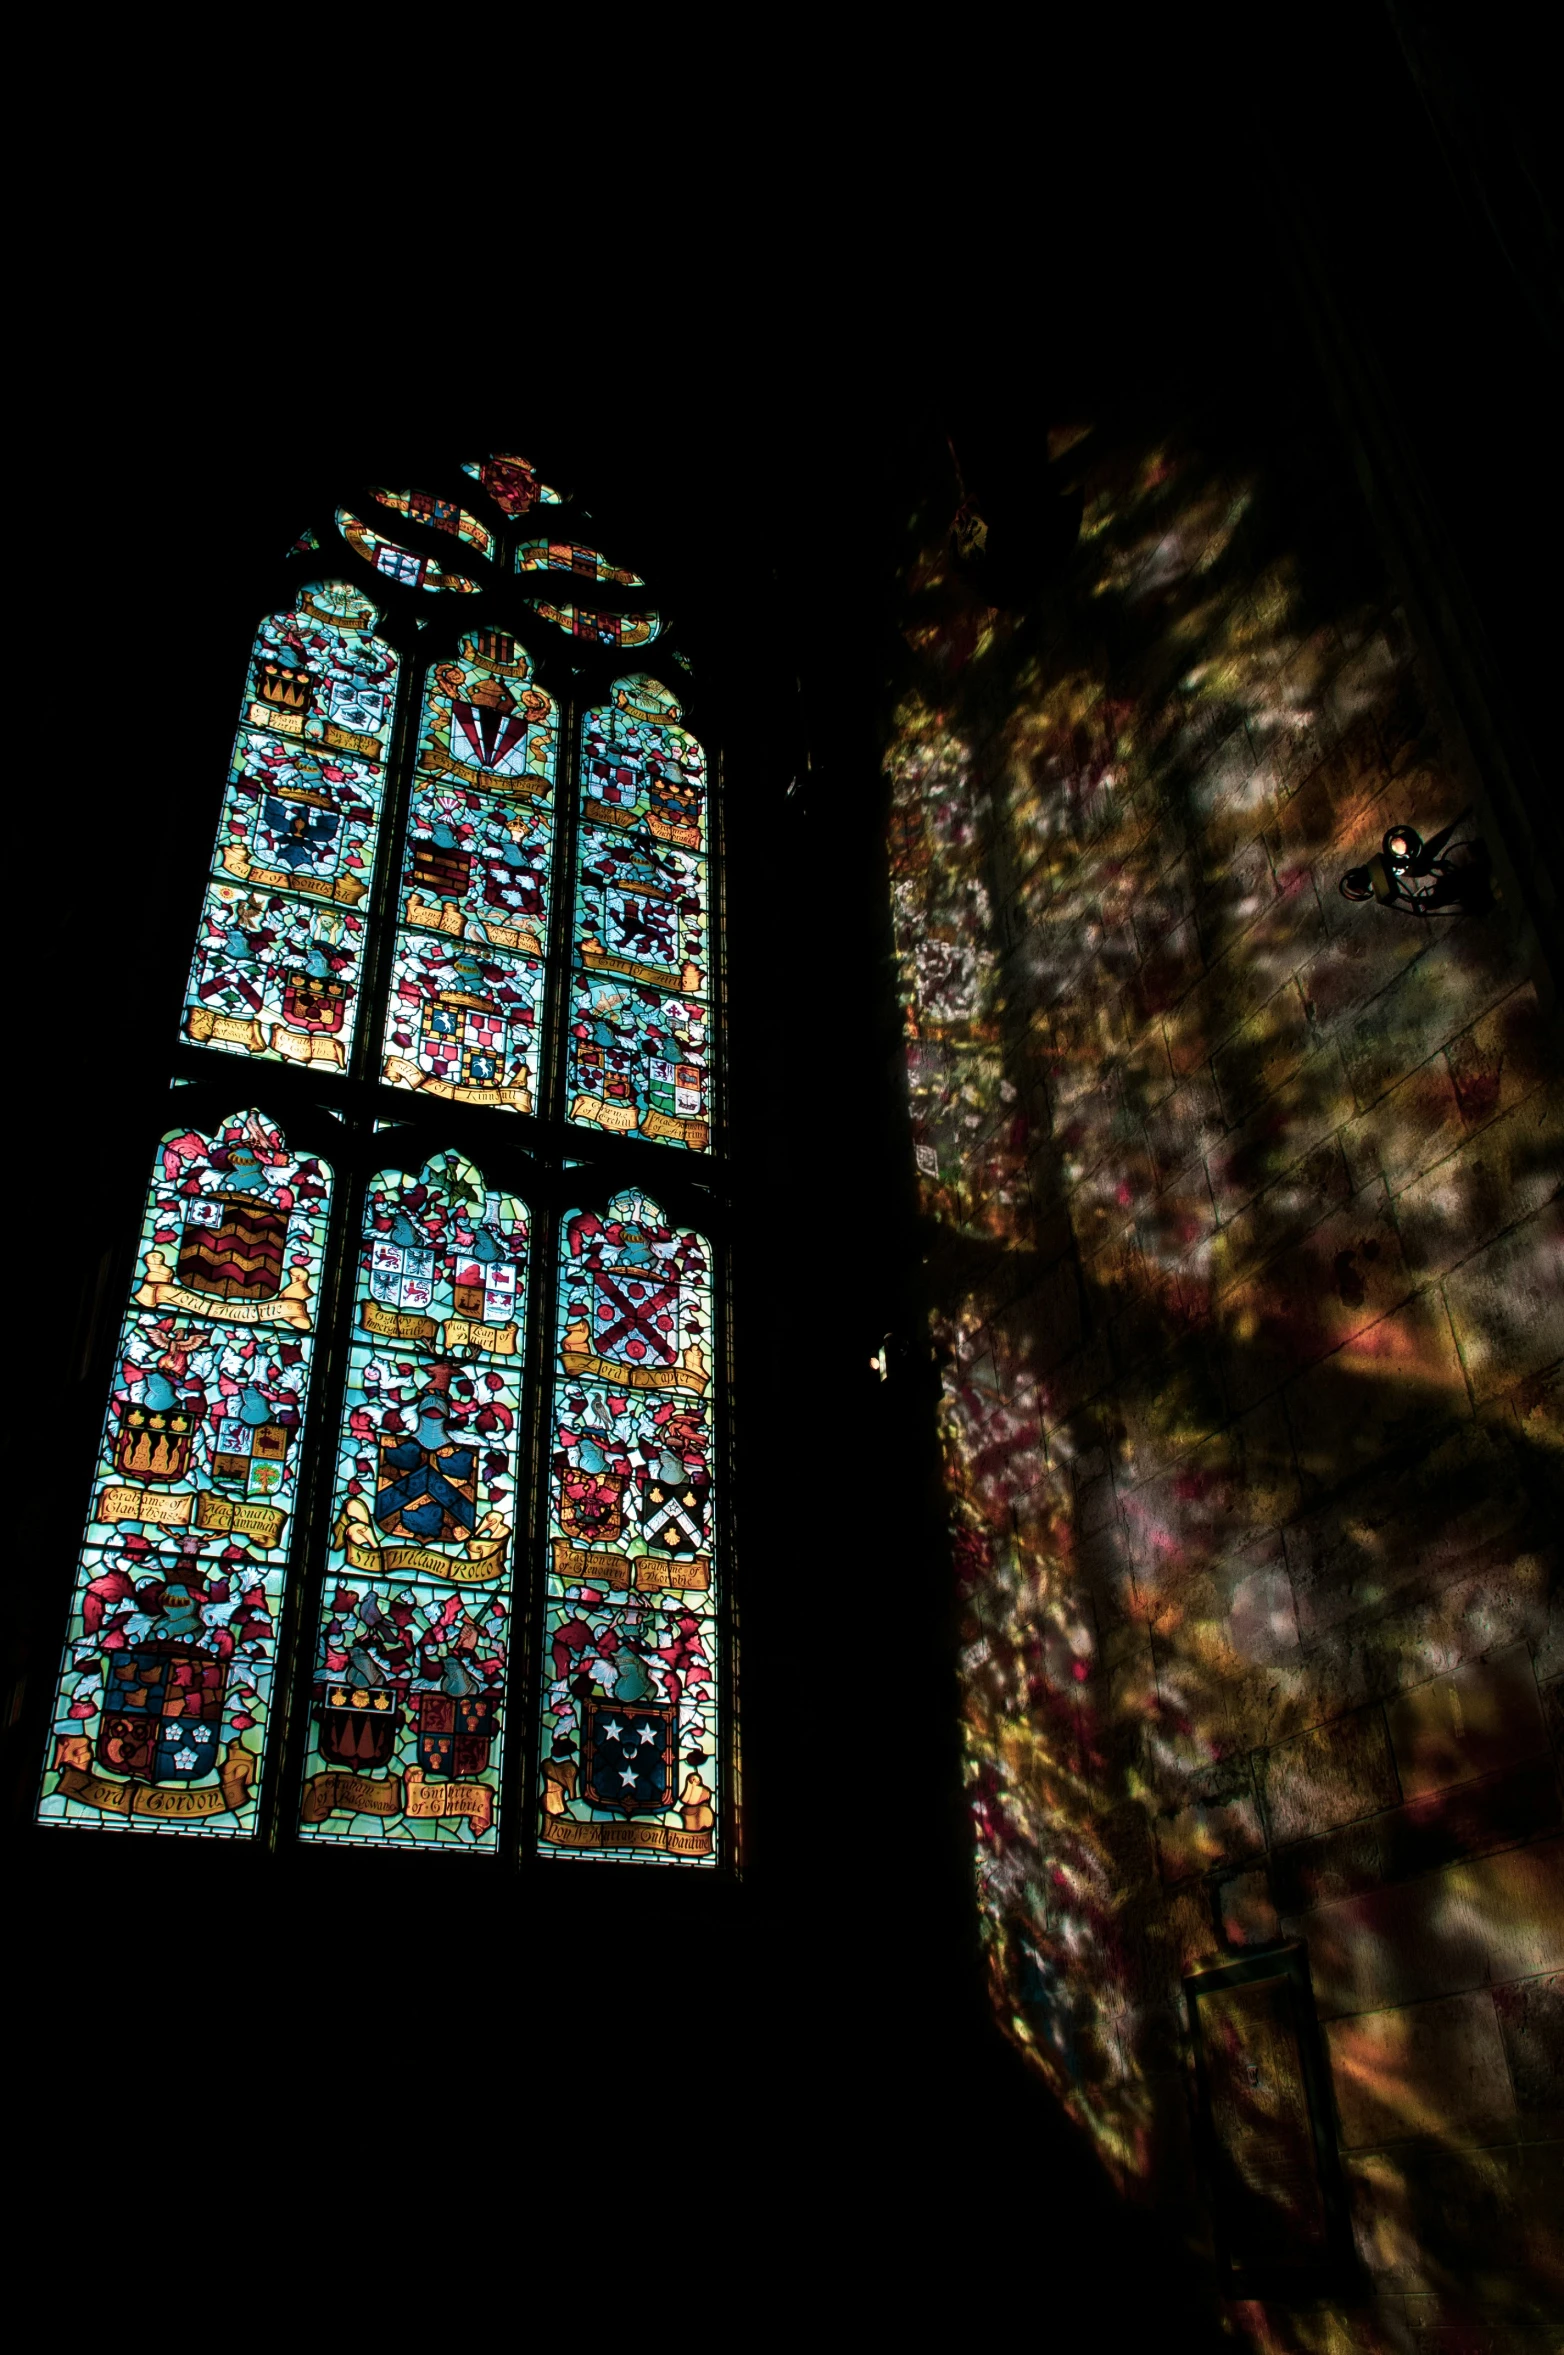 a stained glass window that appears to be lit up